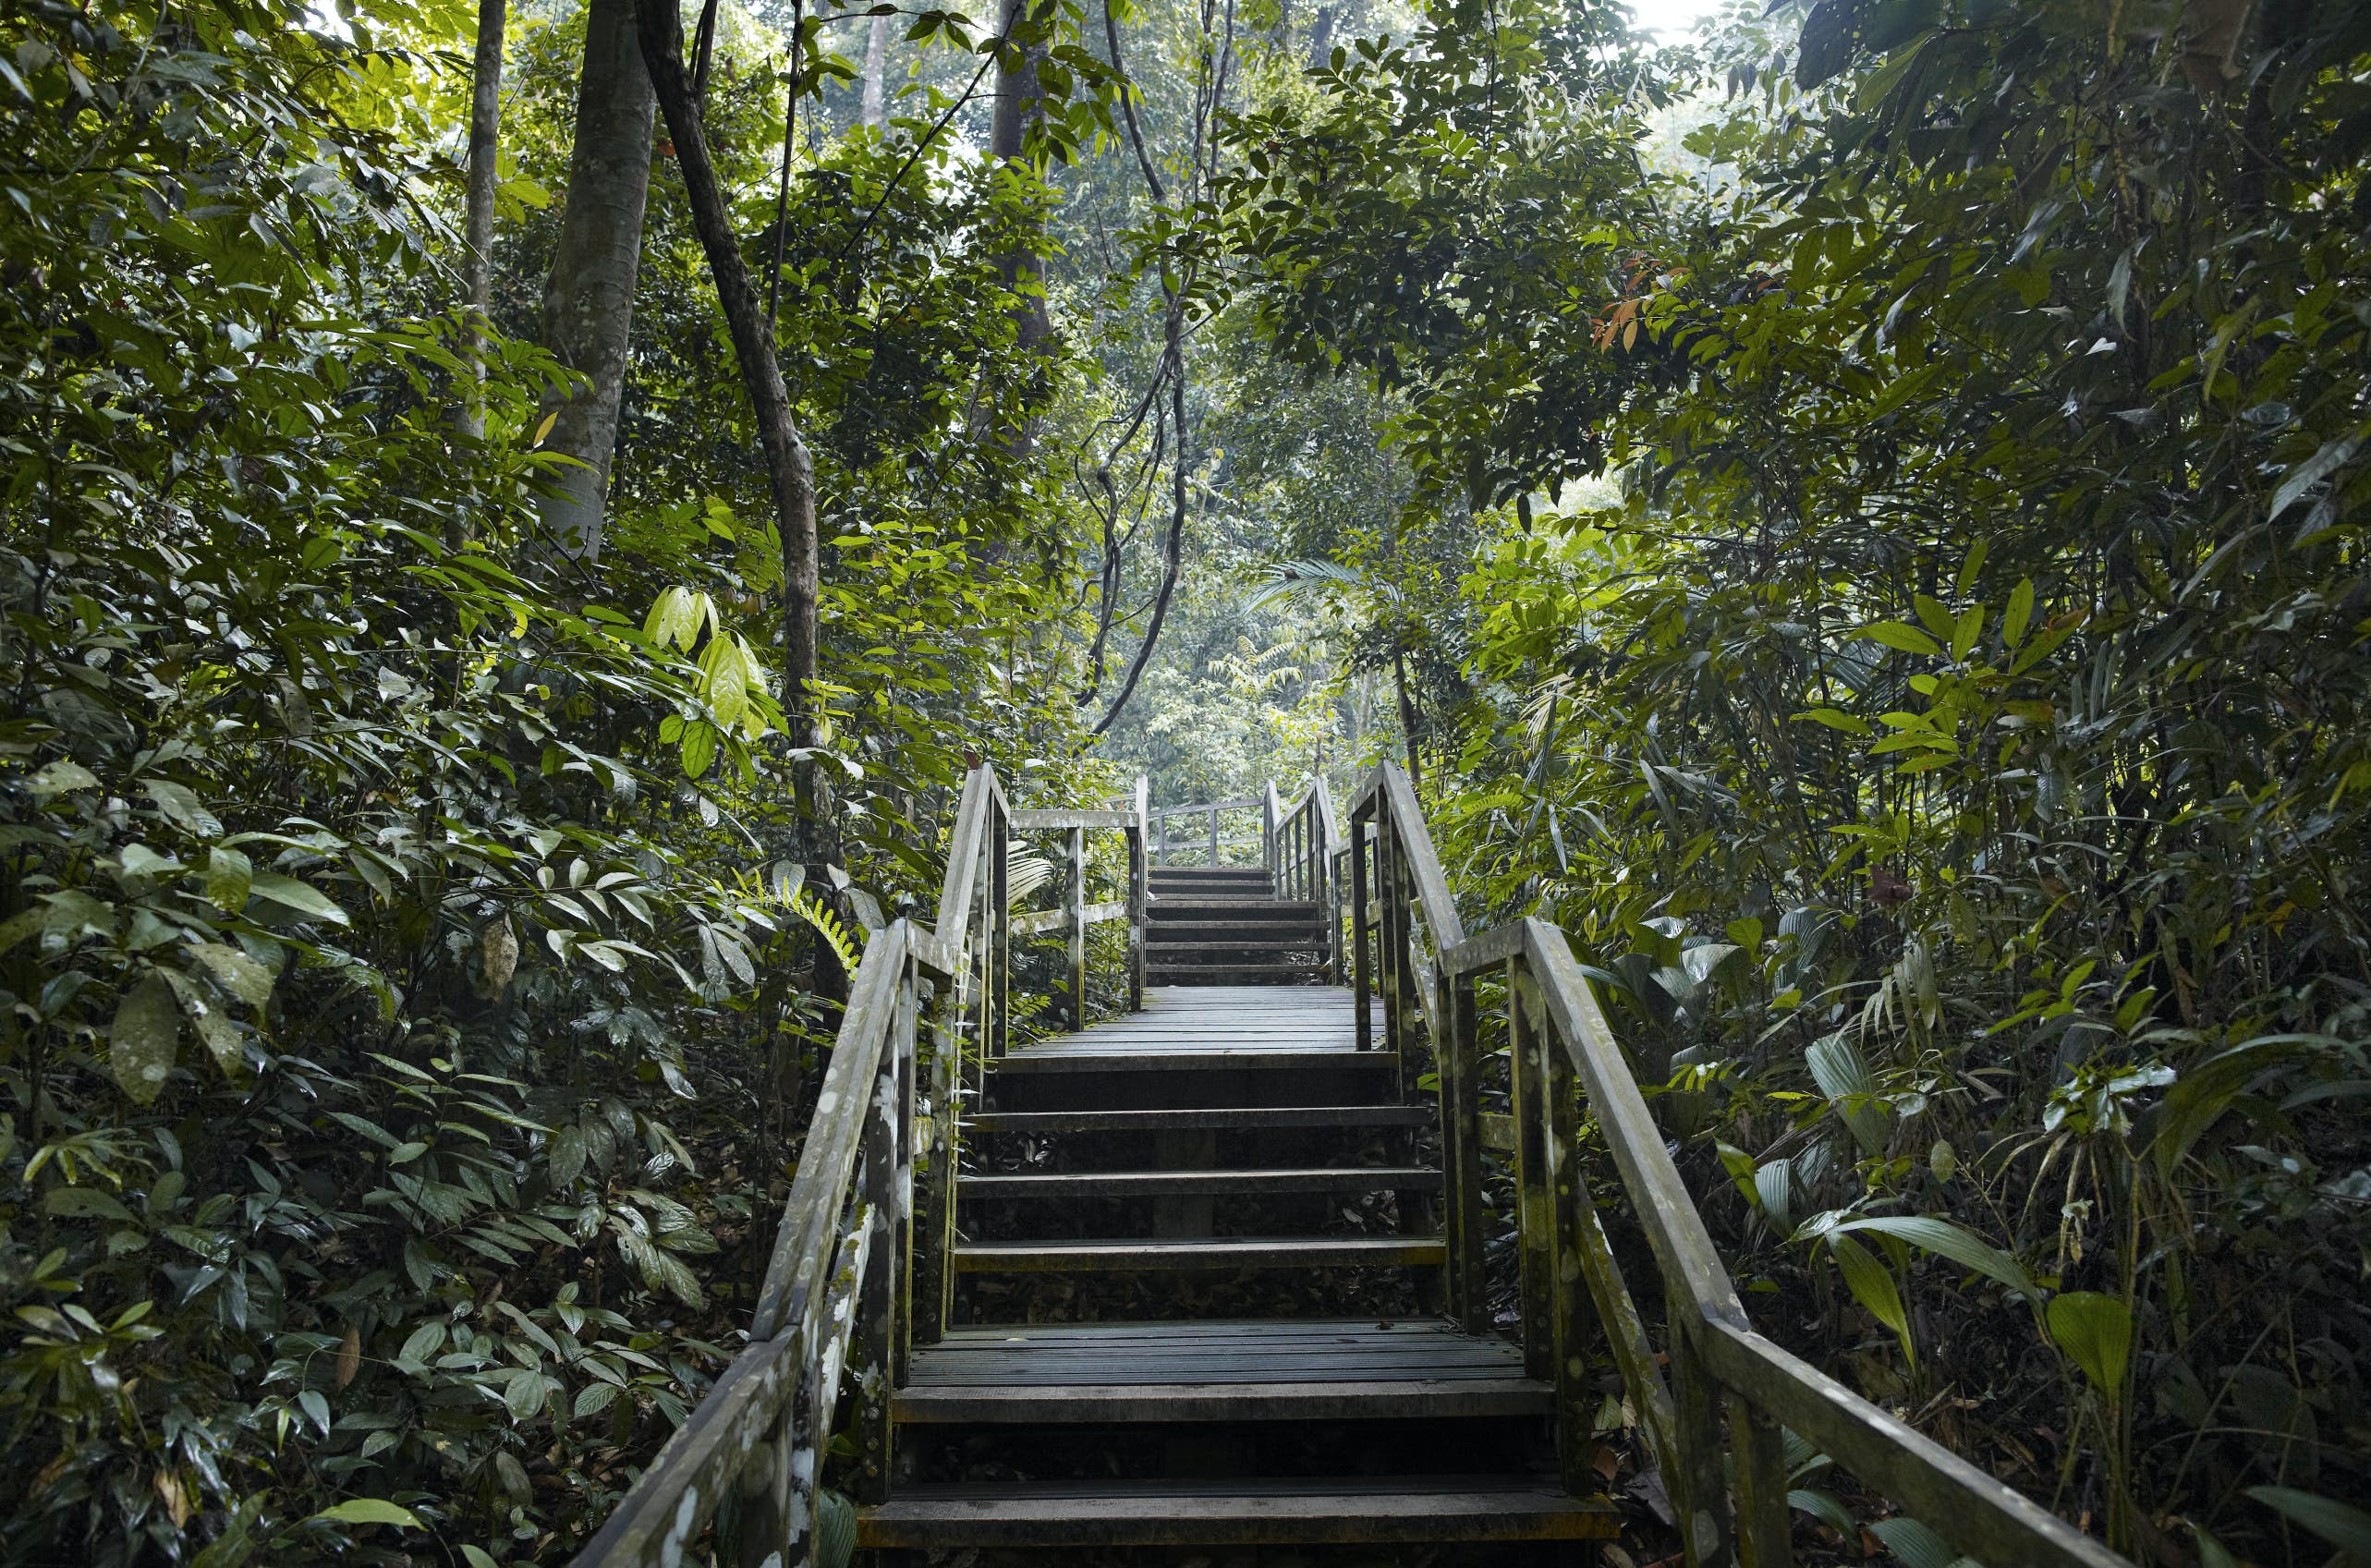 What is unique about Bukit Timah Nature Reserve